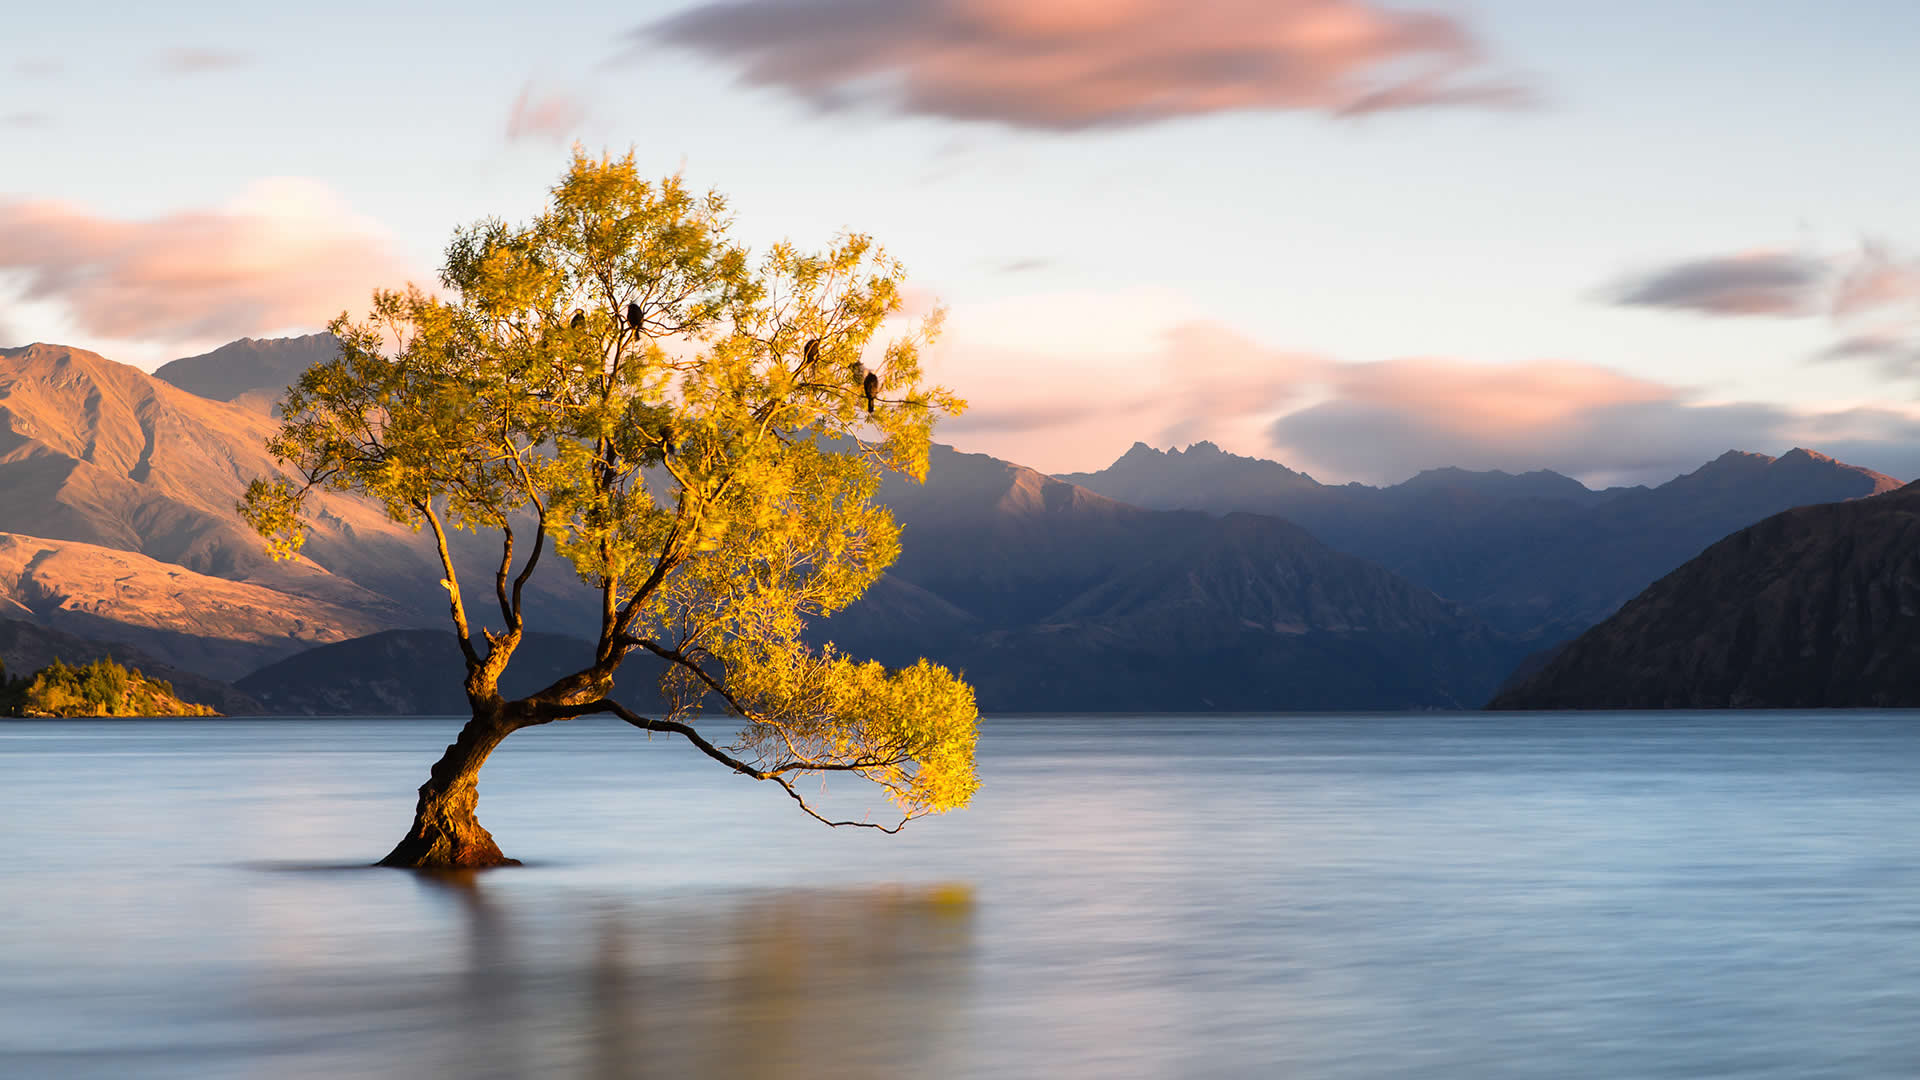 A tree in a lake in New Zealand